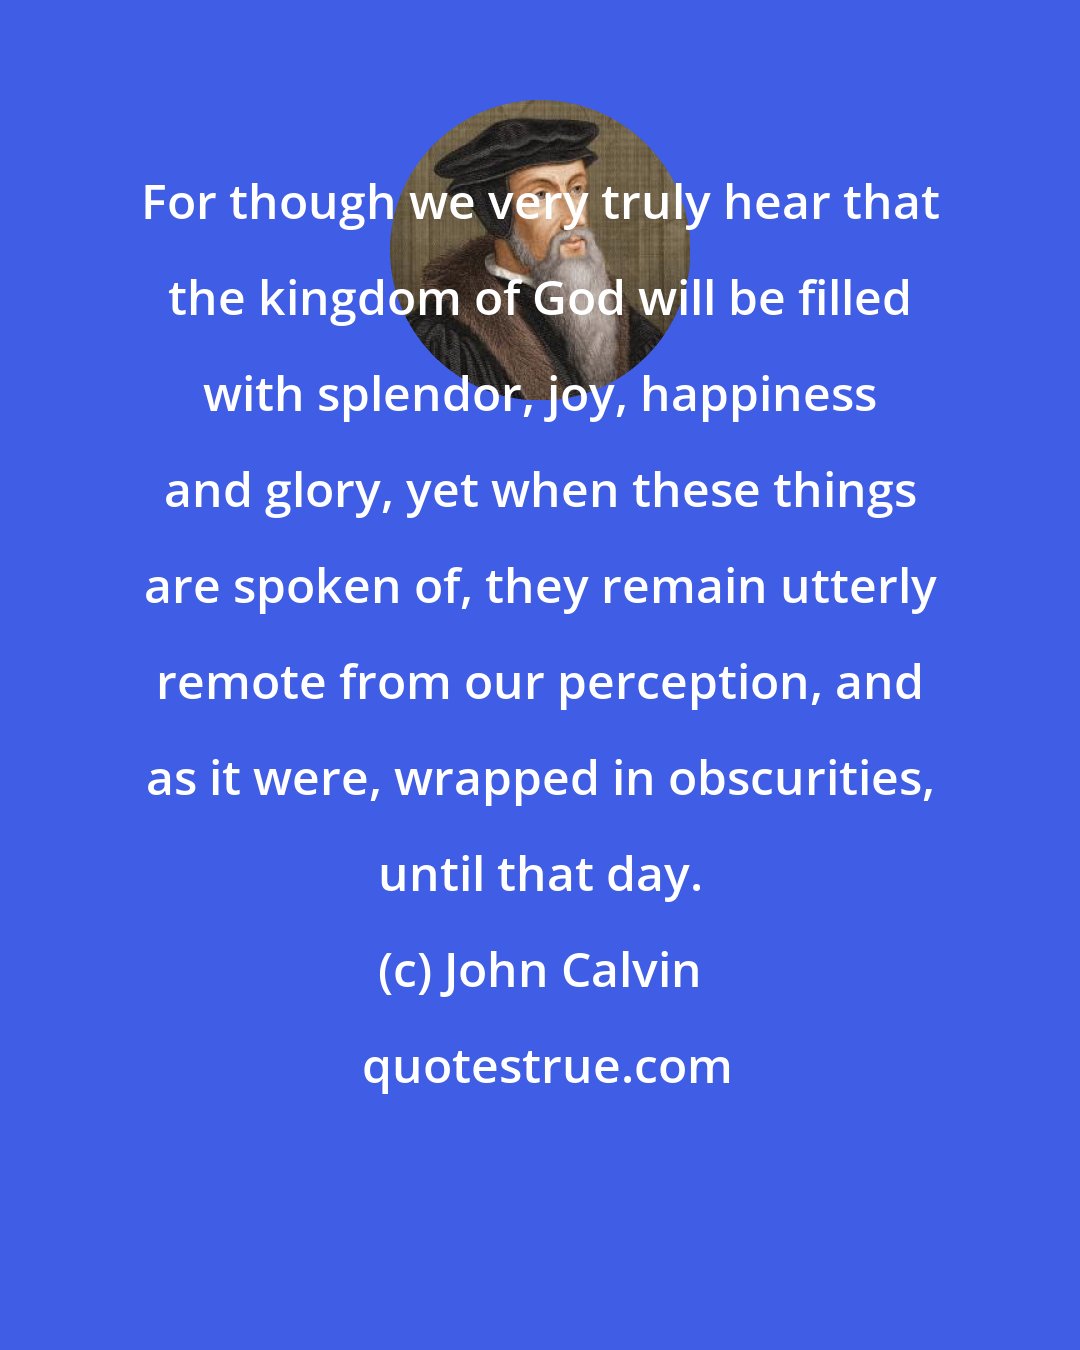 John Calvin: For though we very truly hear that the kingdom of God will be filled with splendor, joy, happiness and glory, yet when these things are spoken of, they remain utterly remote from our perception, and as it were, wrapped in obscurities, until that day.